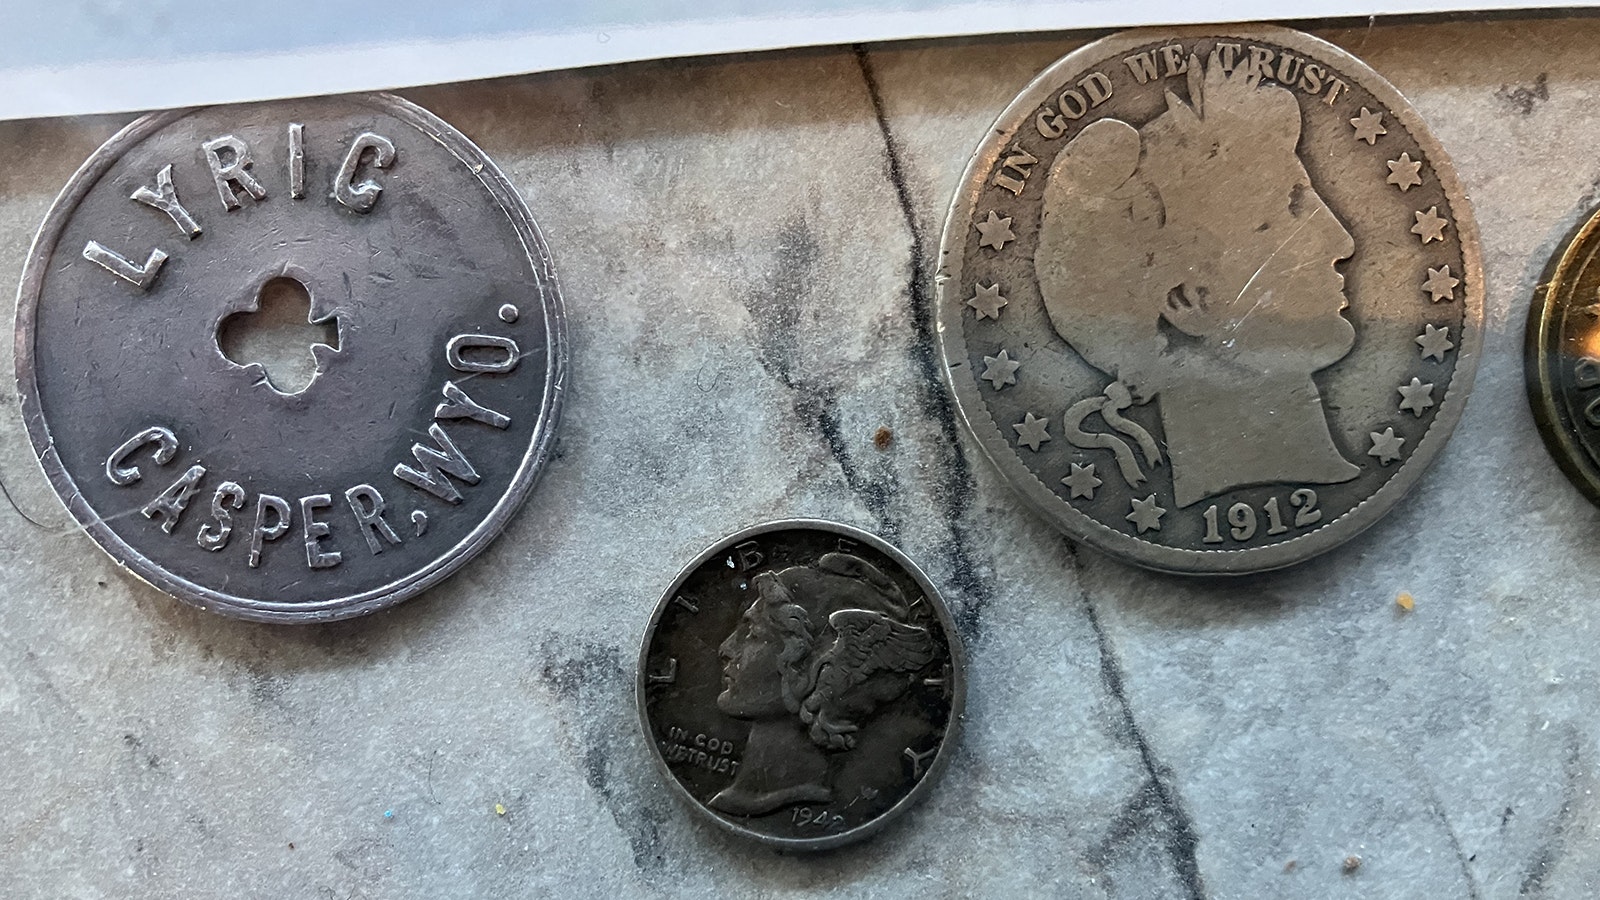 Coins from the early part of the past century and token from the Lyric Theater are part of the treasures uncovered during renovations.